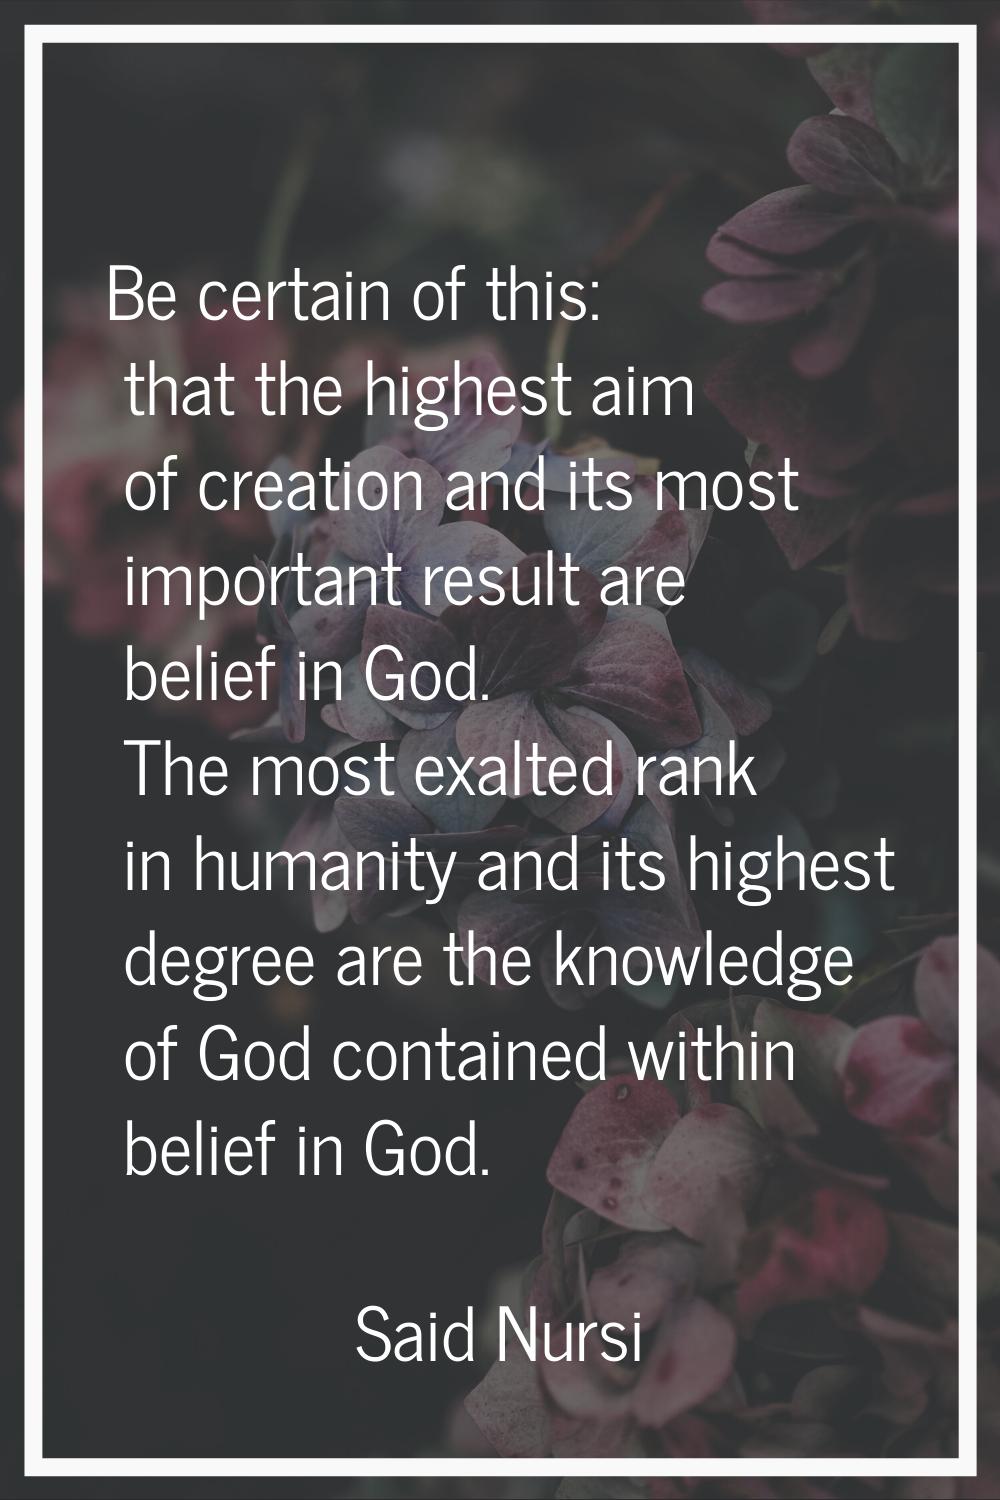 Be certain of this: that the highest aim of creation and its most important result are belief in Go